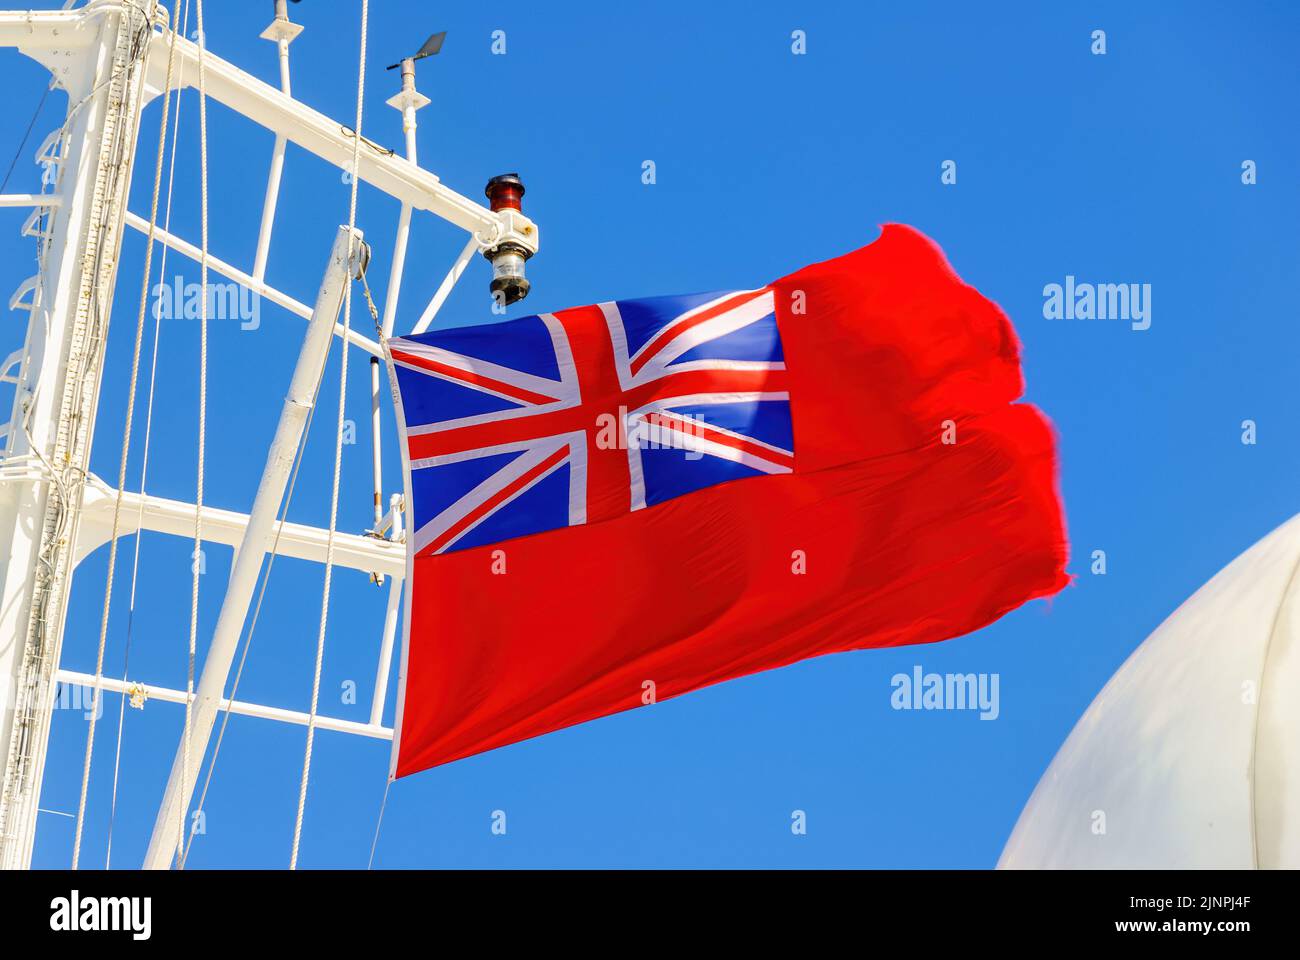 The Red Ensign is the national flag of the British merchant marine. Stock Photo